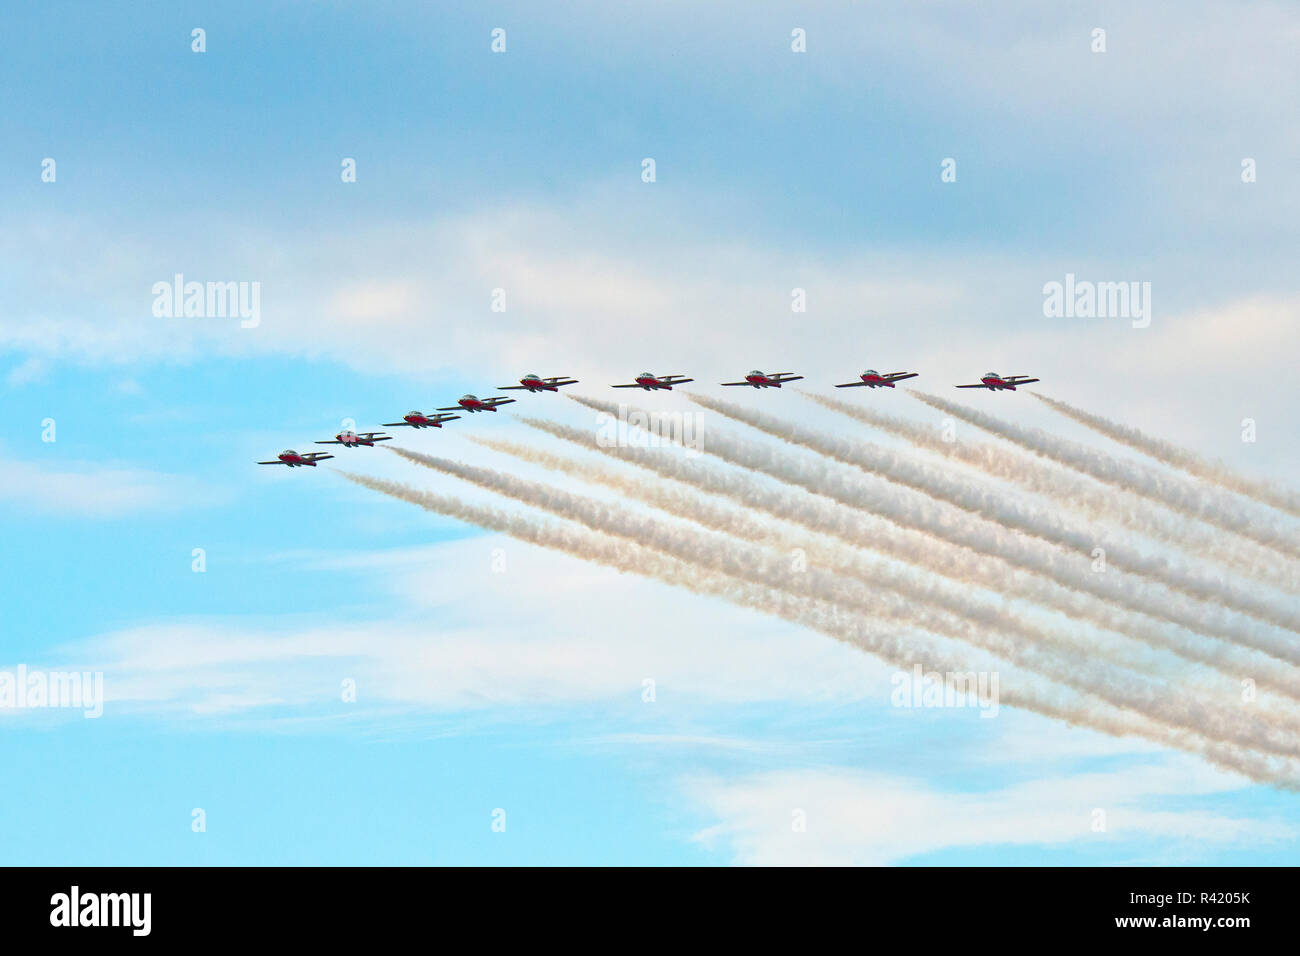 USA, Wisconsin, Oshkosh, AirVenture 2016, Canadian Air Force Snowbirds Aerobatic Team Aircraft flying Canadair CT-114 Tudor Jets formation Pattern Stock Photo